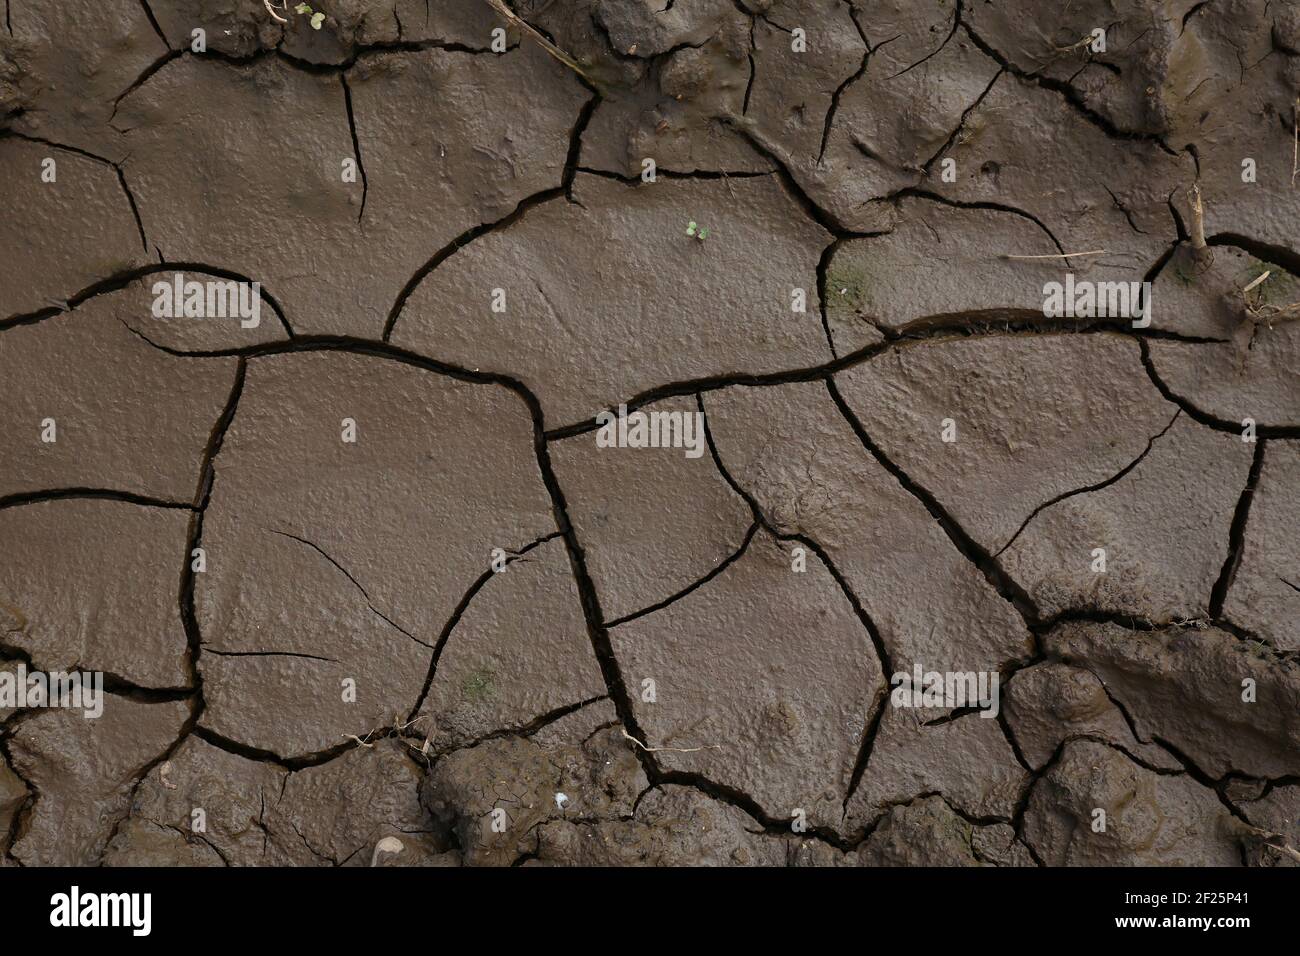 Dark Dry and Cracked Soil Background Stock Photo